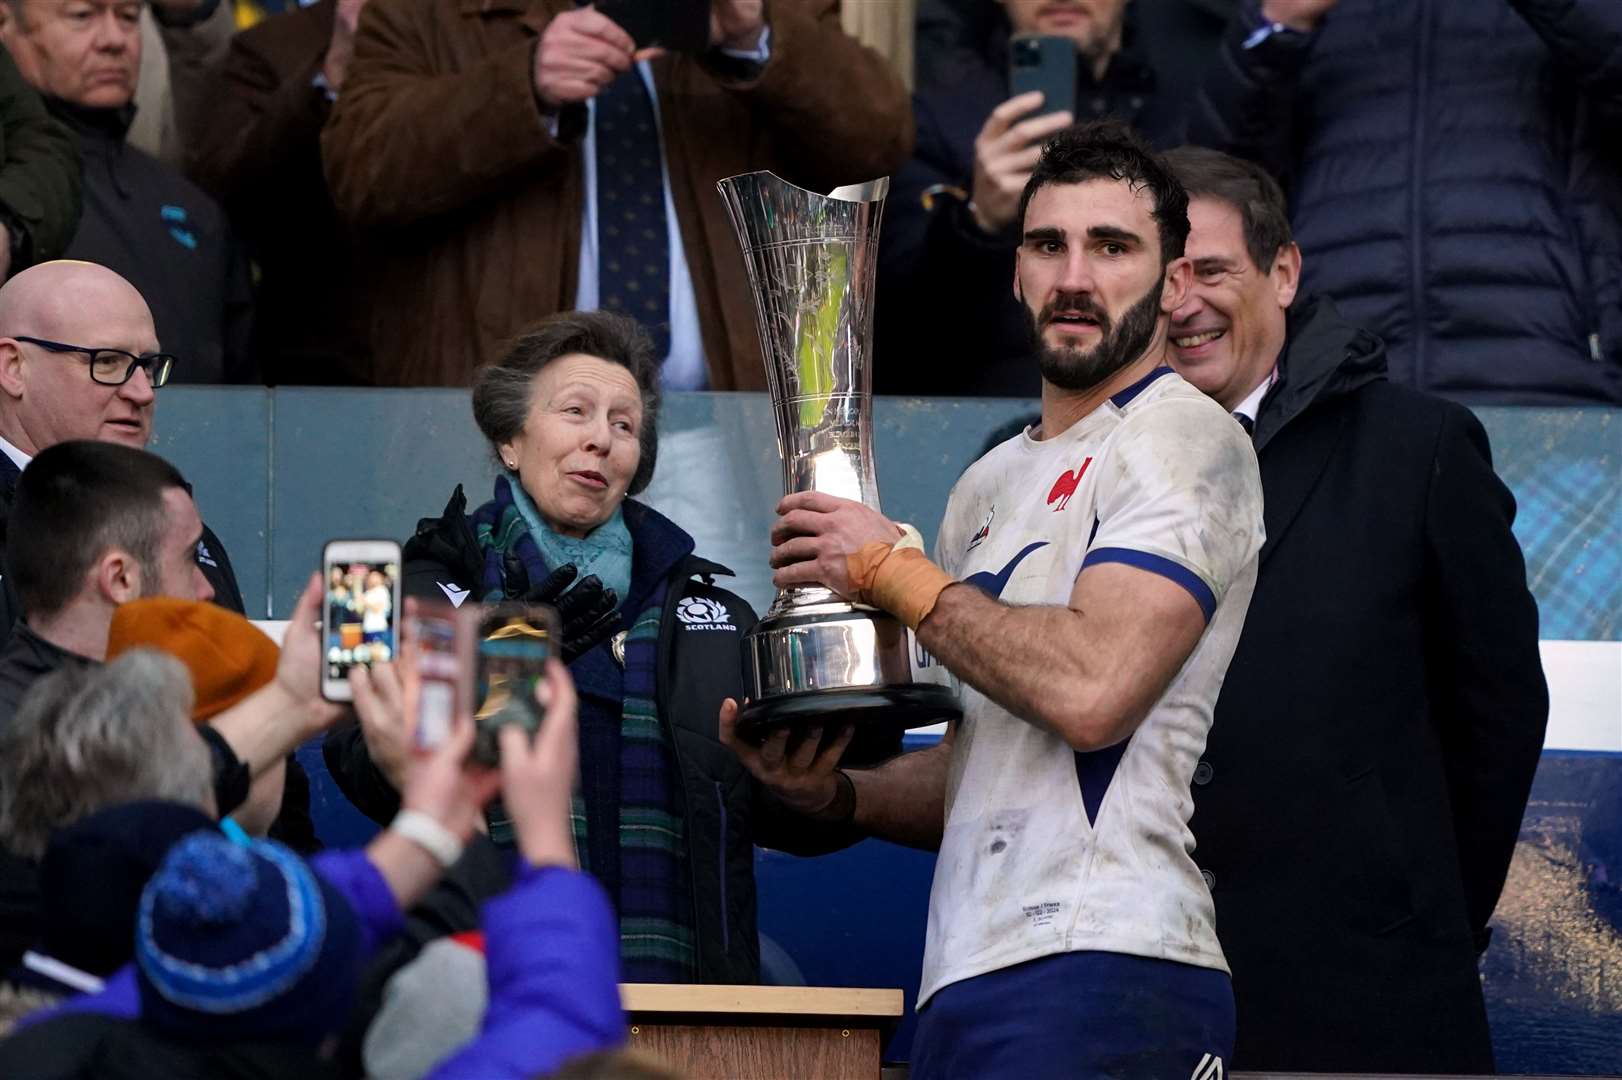 The Princess Royal presented the Auld Alliance Trophy at Murrayfield Stadium on Saturday (Andrew Milligan/PA)